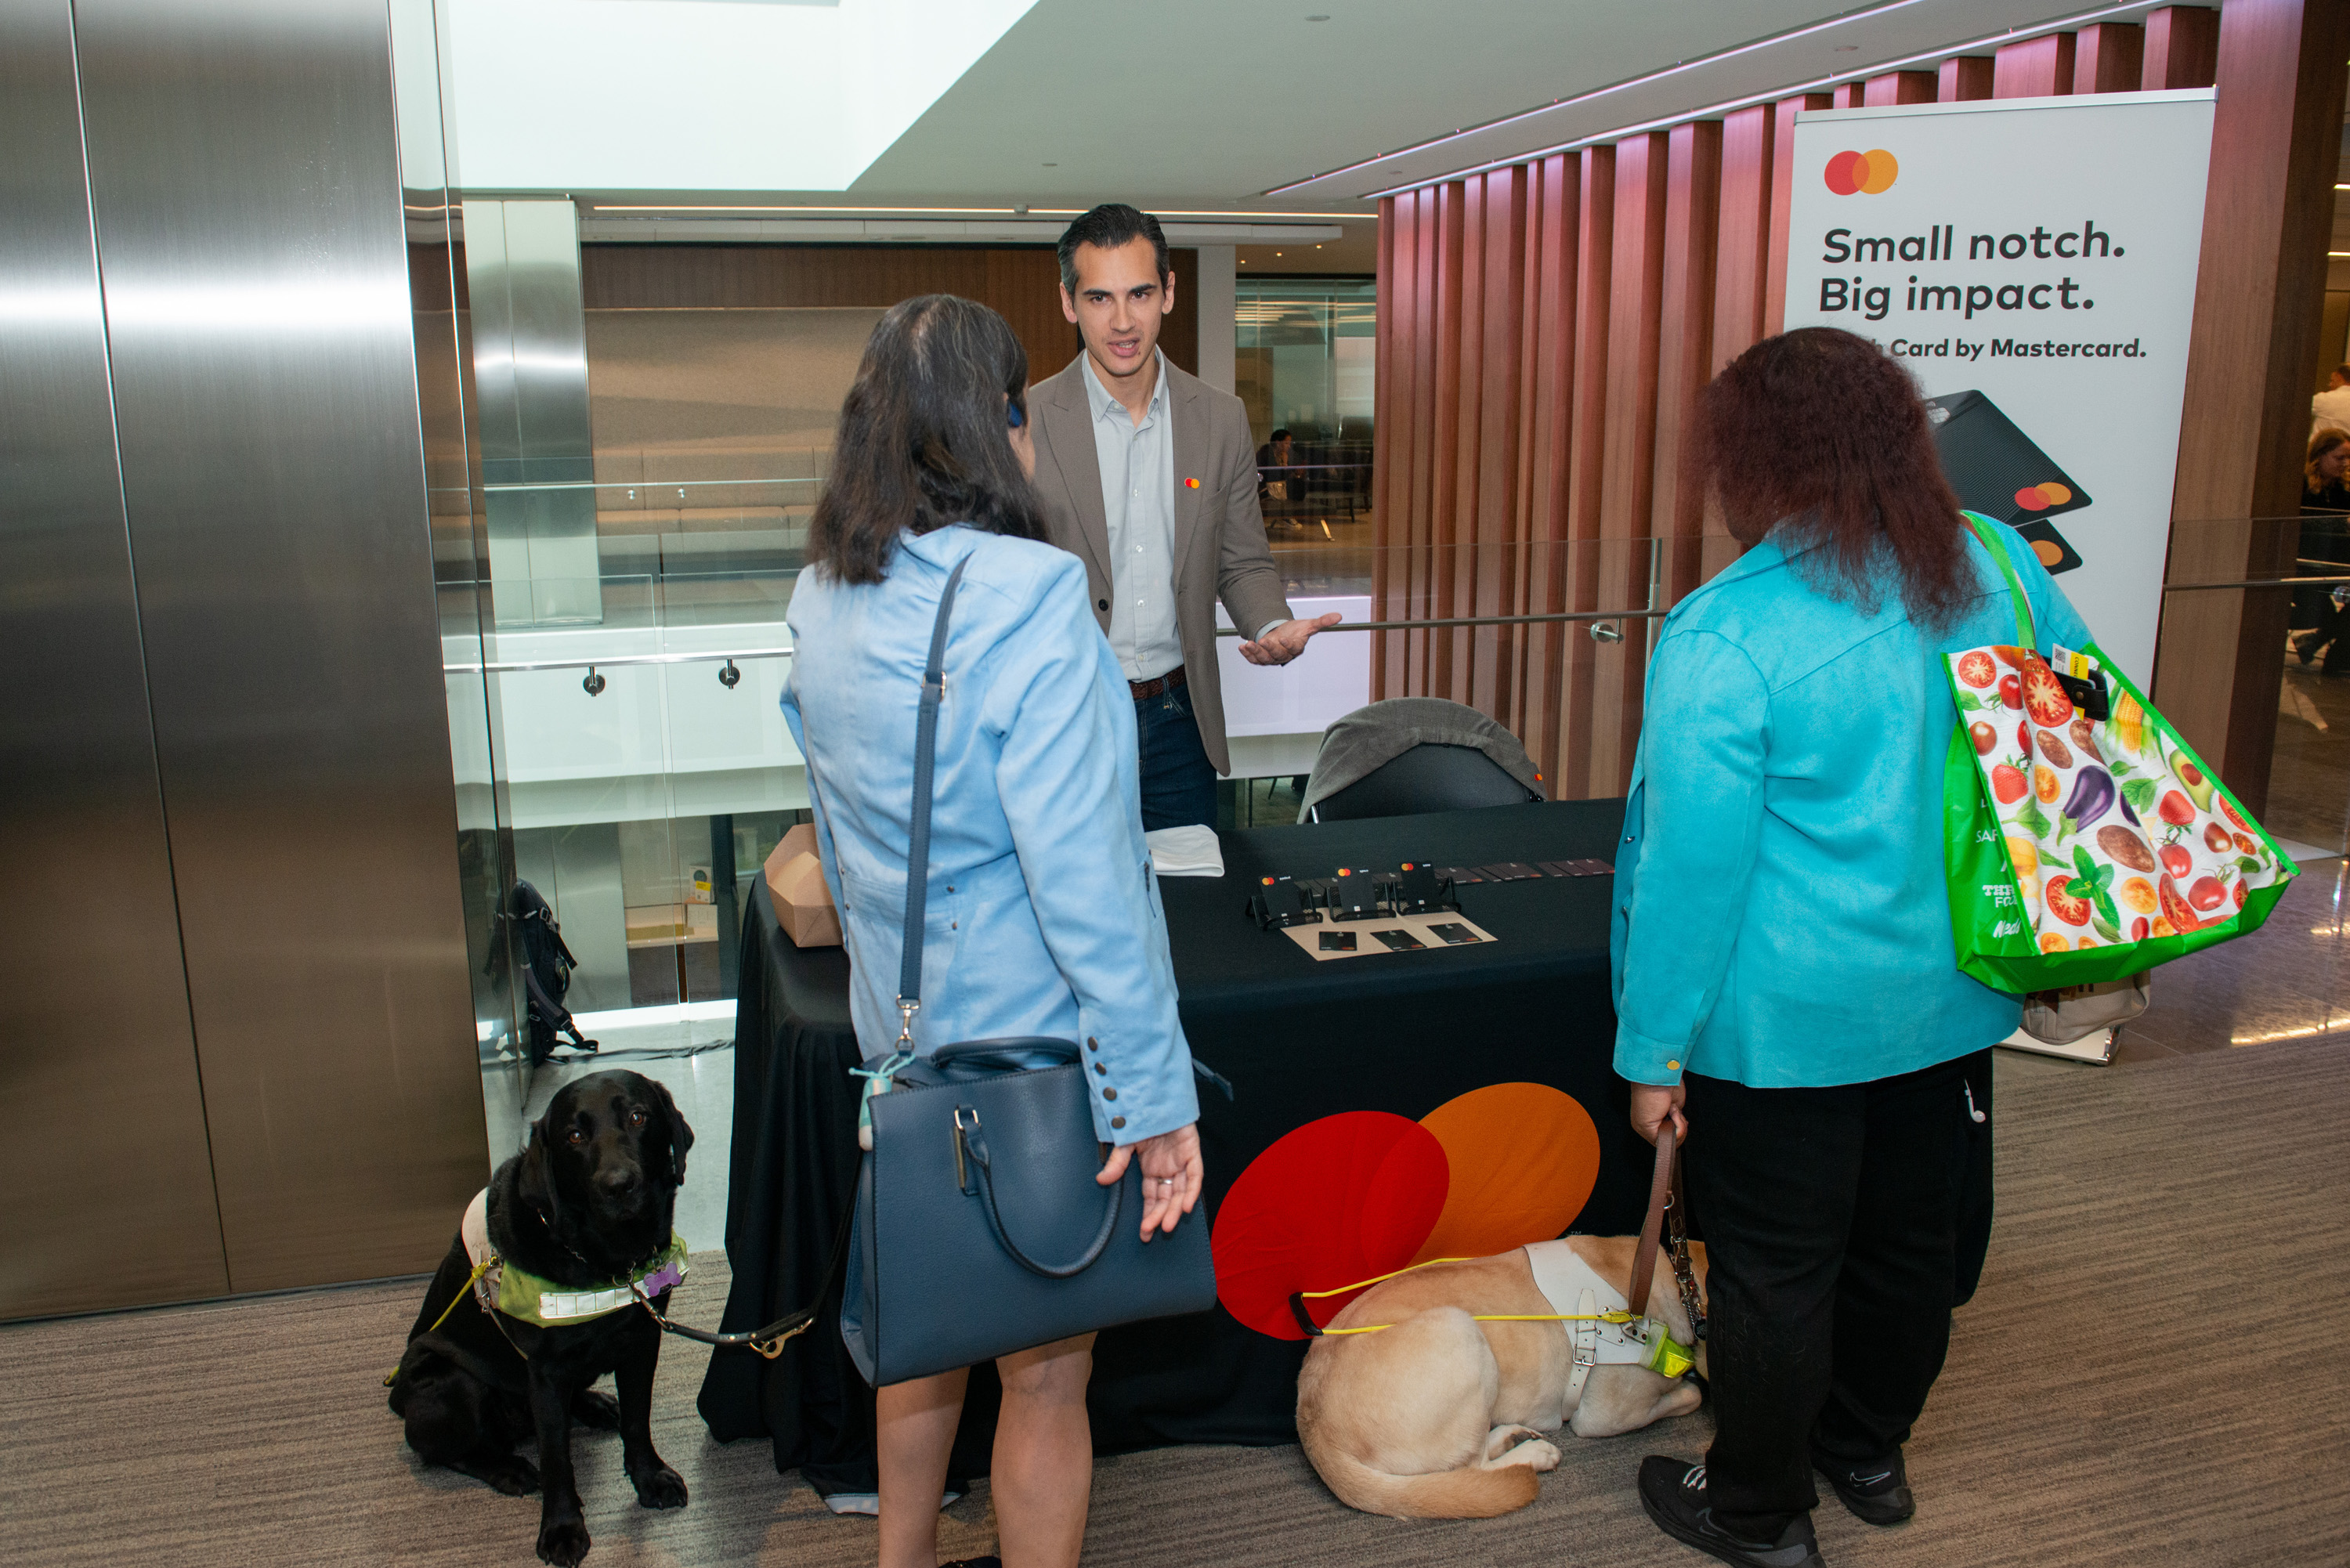 Two people visit a mastercard booth. There is a black lab guide dog sitting beside one of the people visiting the booth. 